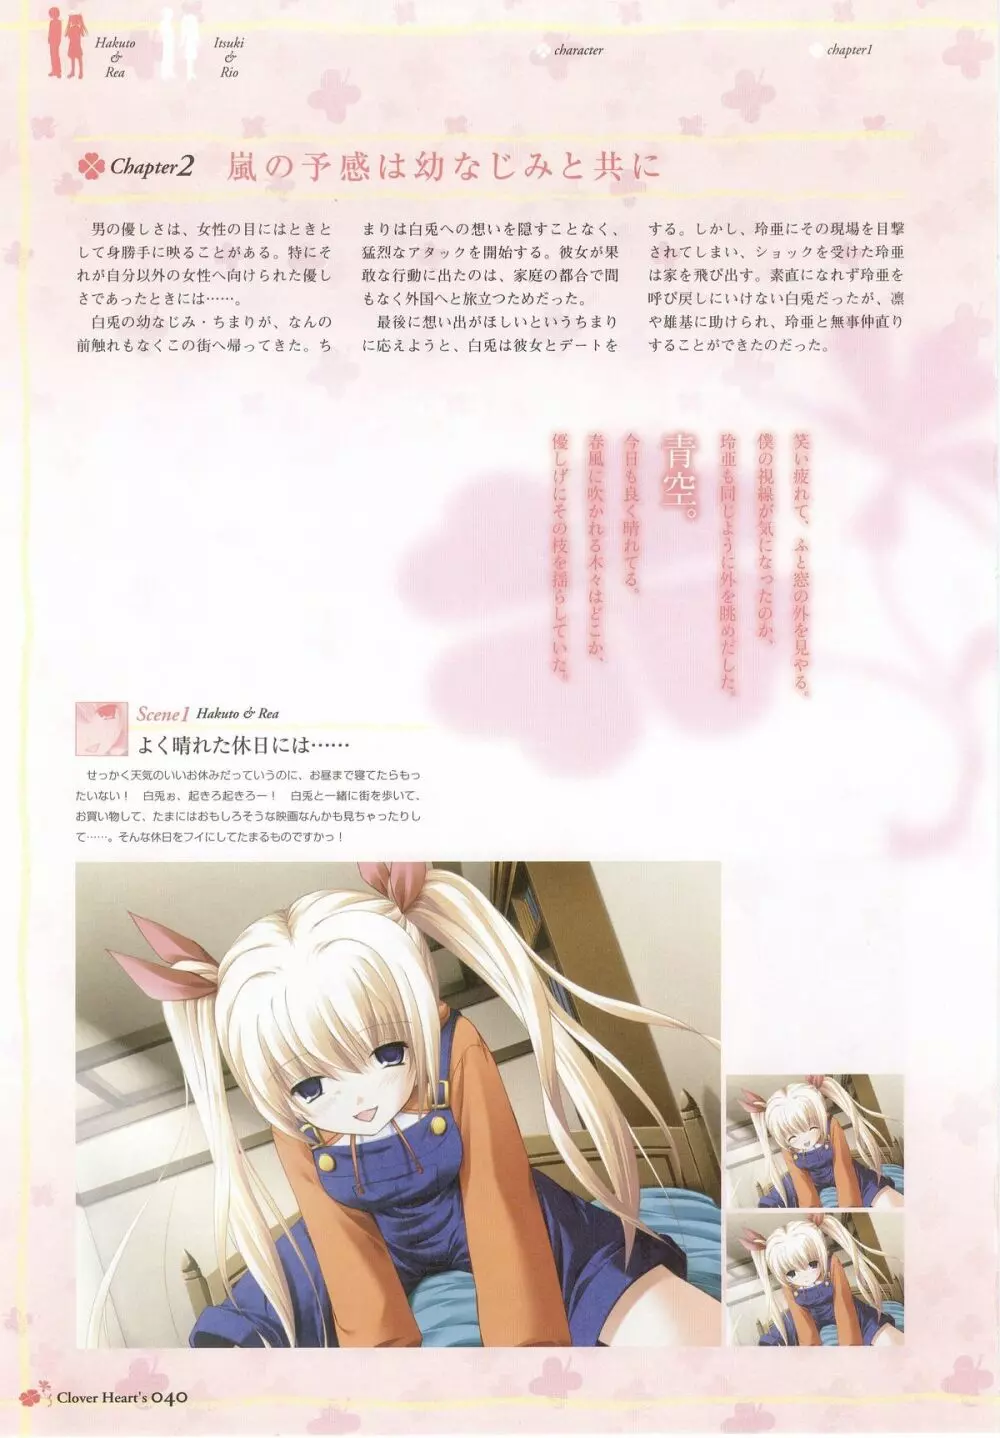 clover heart's visual fan book Page.42